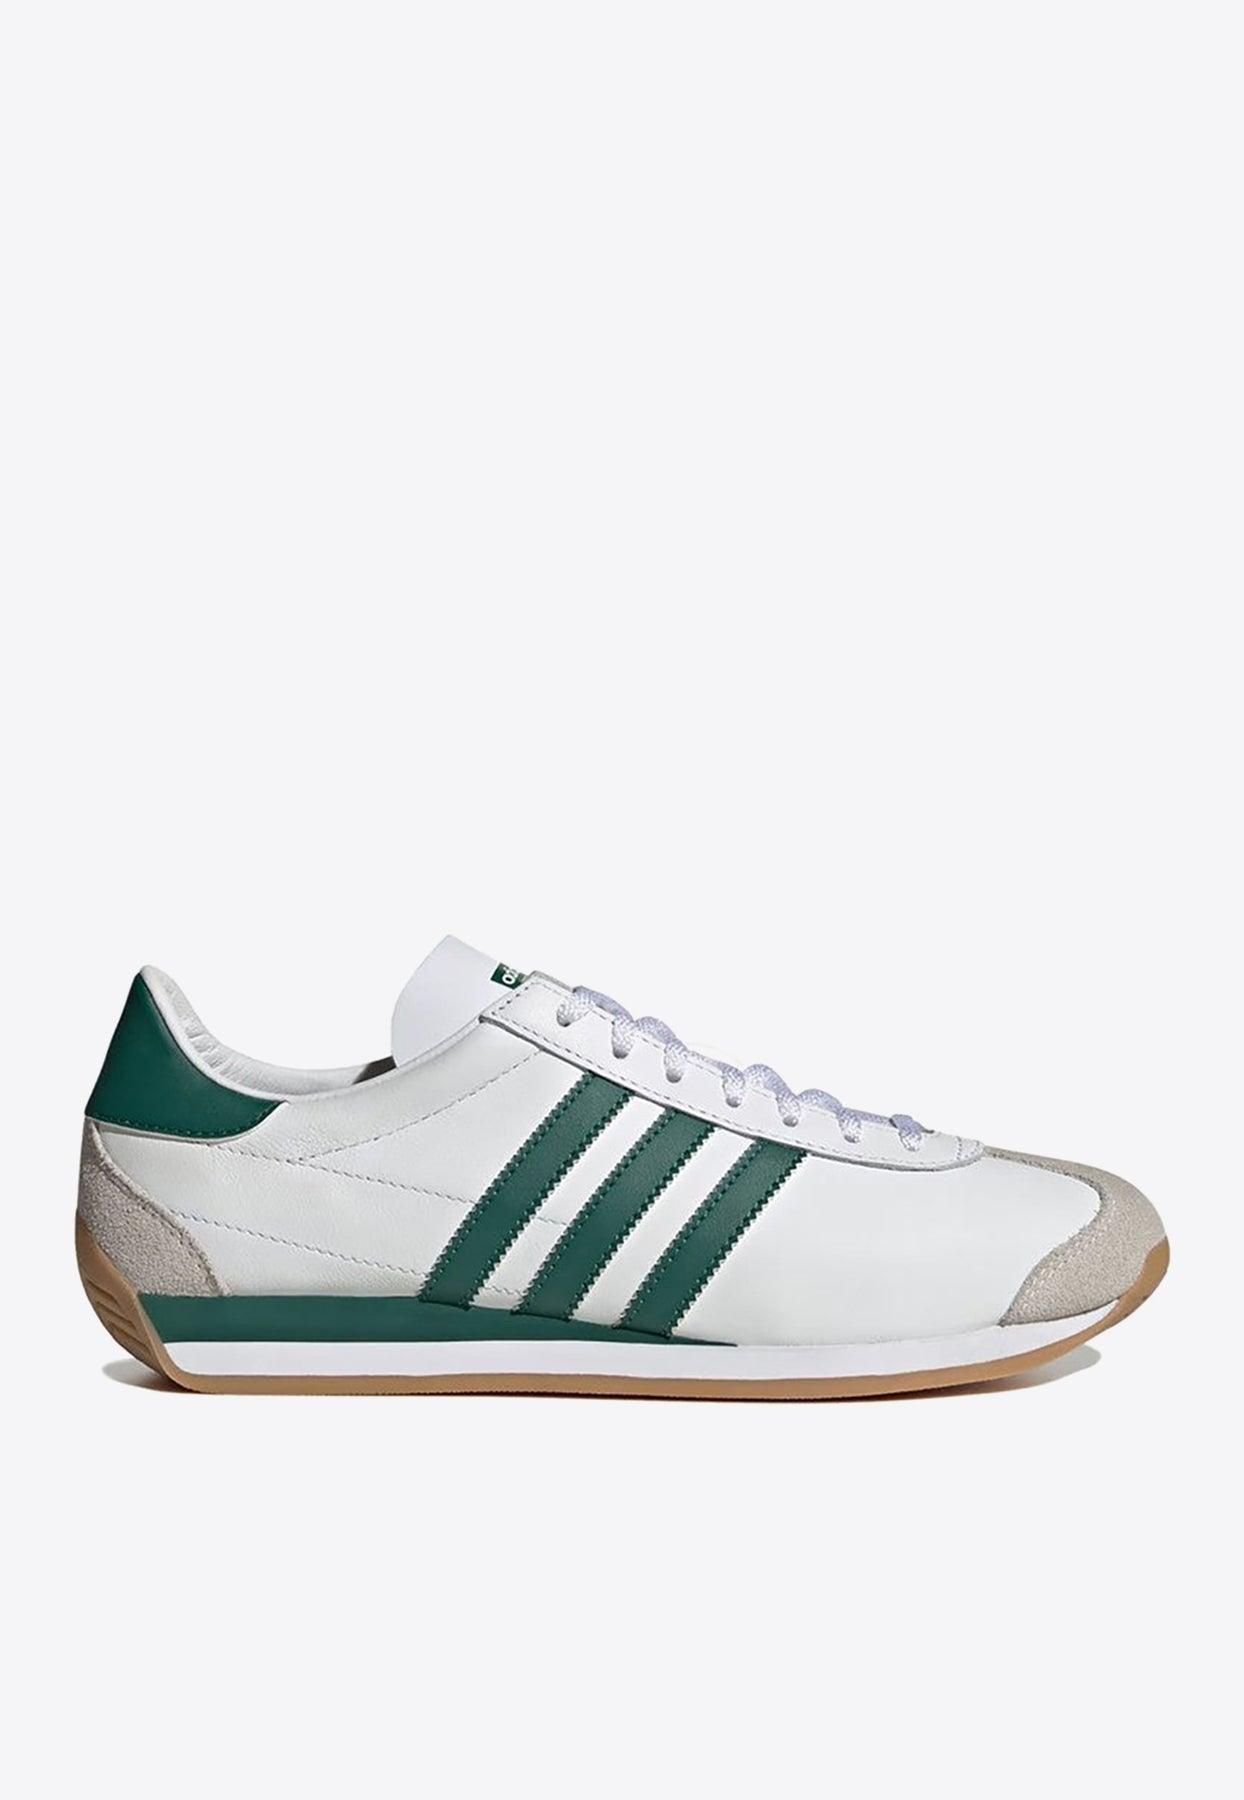 adidas Originals 'country Og' Sneakers in White | Lyst